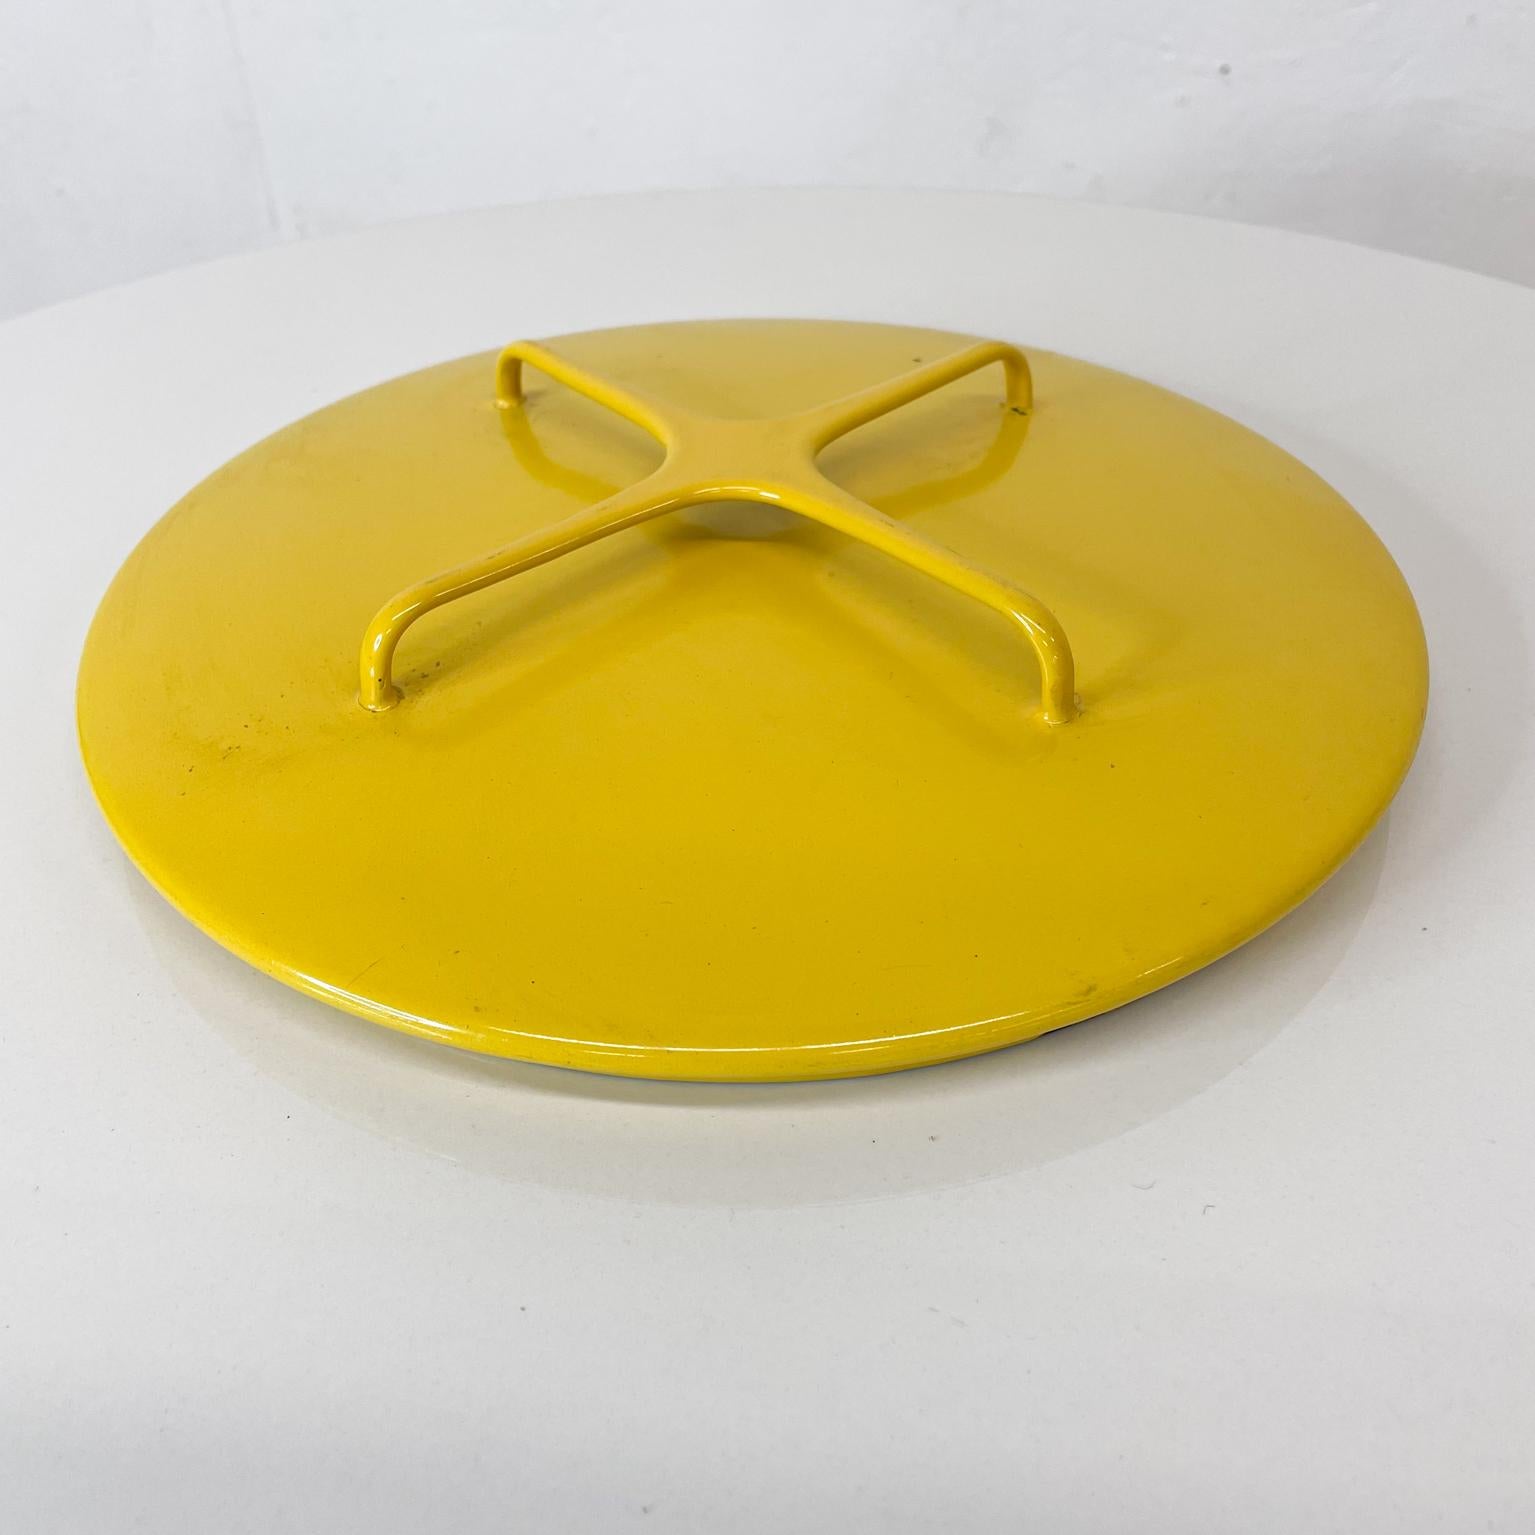 Dansk designs IHQ Kobenstyle Sunburst Yellow Dutch Oven Lid that doubles as a Trivet
Measures: 9.63 inches diameter interior x 1.88 height x 10.25 diameter outside
Unrestored original vintage condition and presentation.
Please review images.